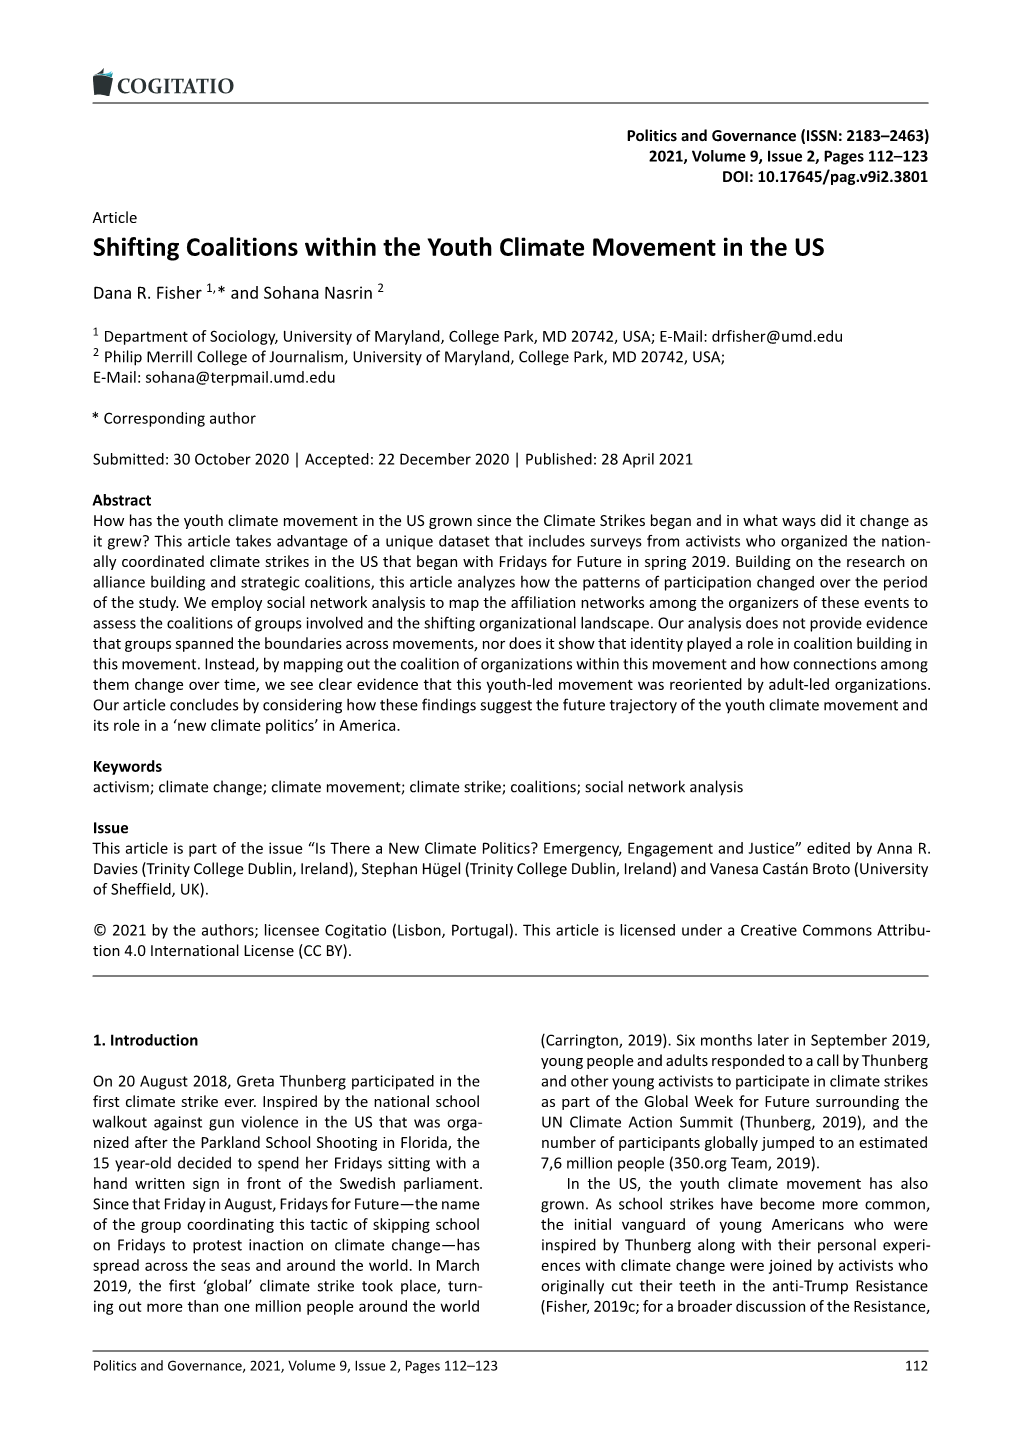 Shifting Coalitions Within the Youth Climate Movement in the US